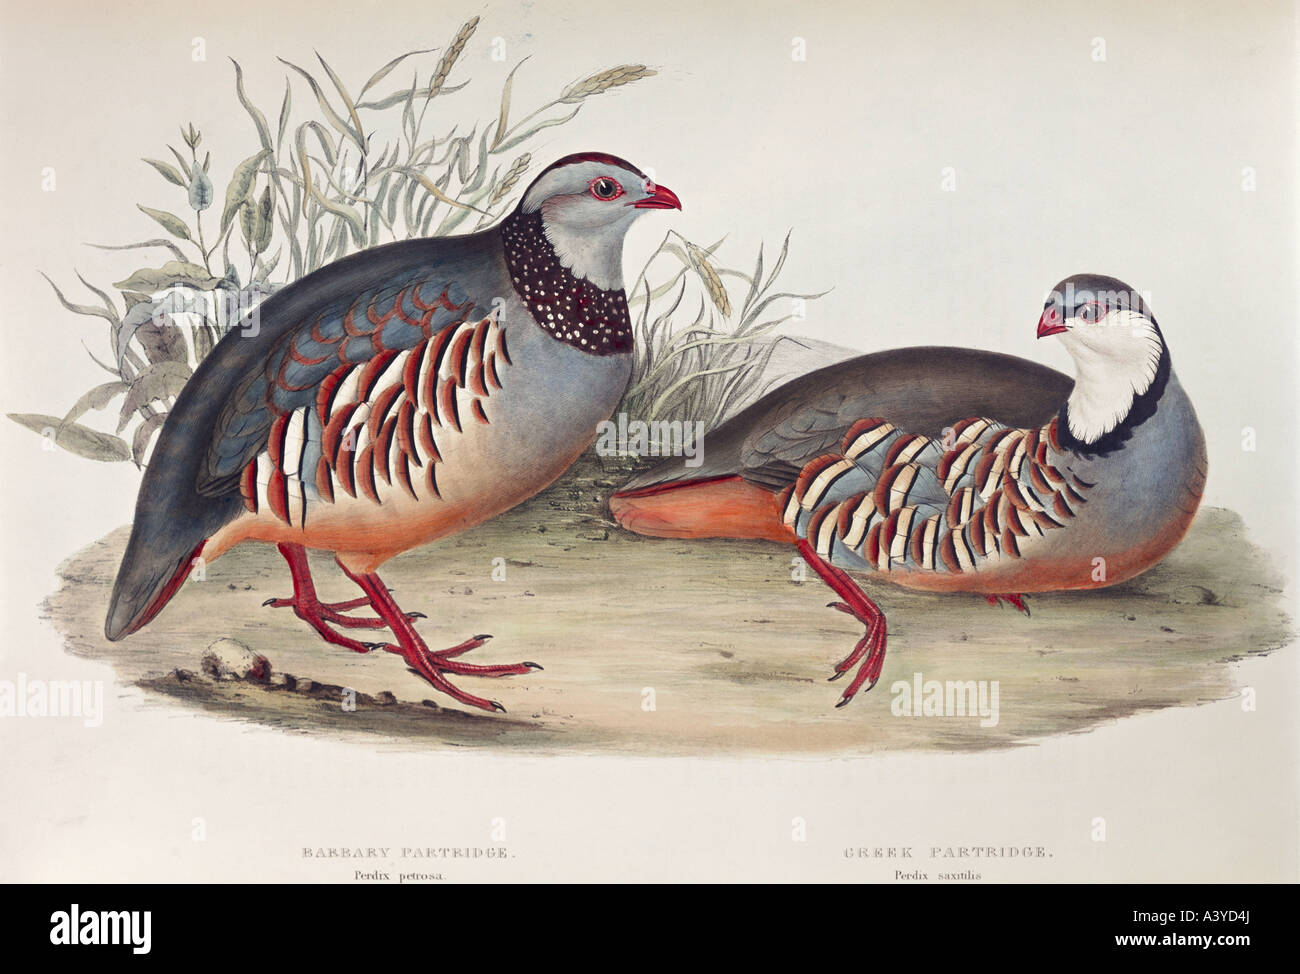 zoology / animal, avian / bird, phasianidae, left: barbary partridge (alectoris barbara), right: greek partridge (alectoris graeca saxatilis), colour lithograph, by John Gould (1804 - 1881), from 'Birds of Europe', London, 1832 / 1837, private collection, , Stock Photo